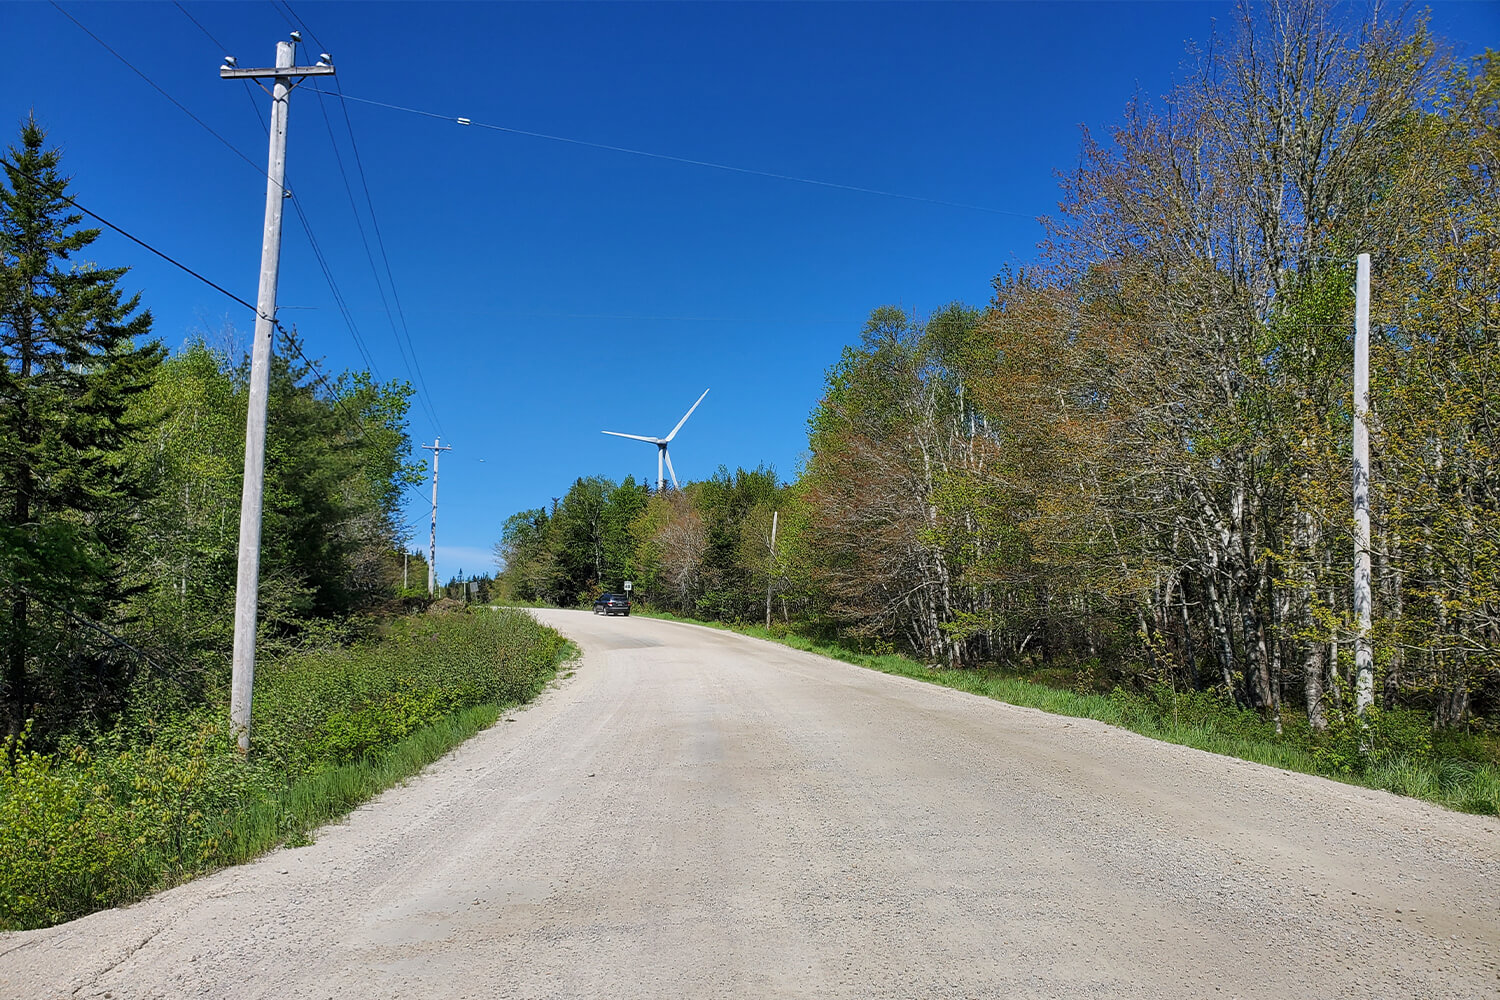 The graded, gravel road leading to the main site, with an on-site wind turbine in the background